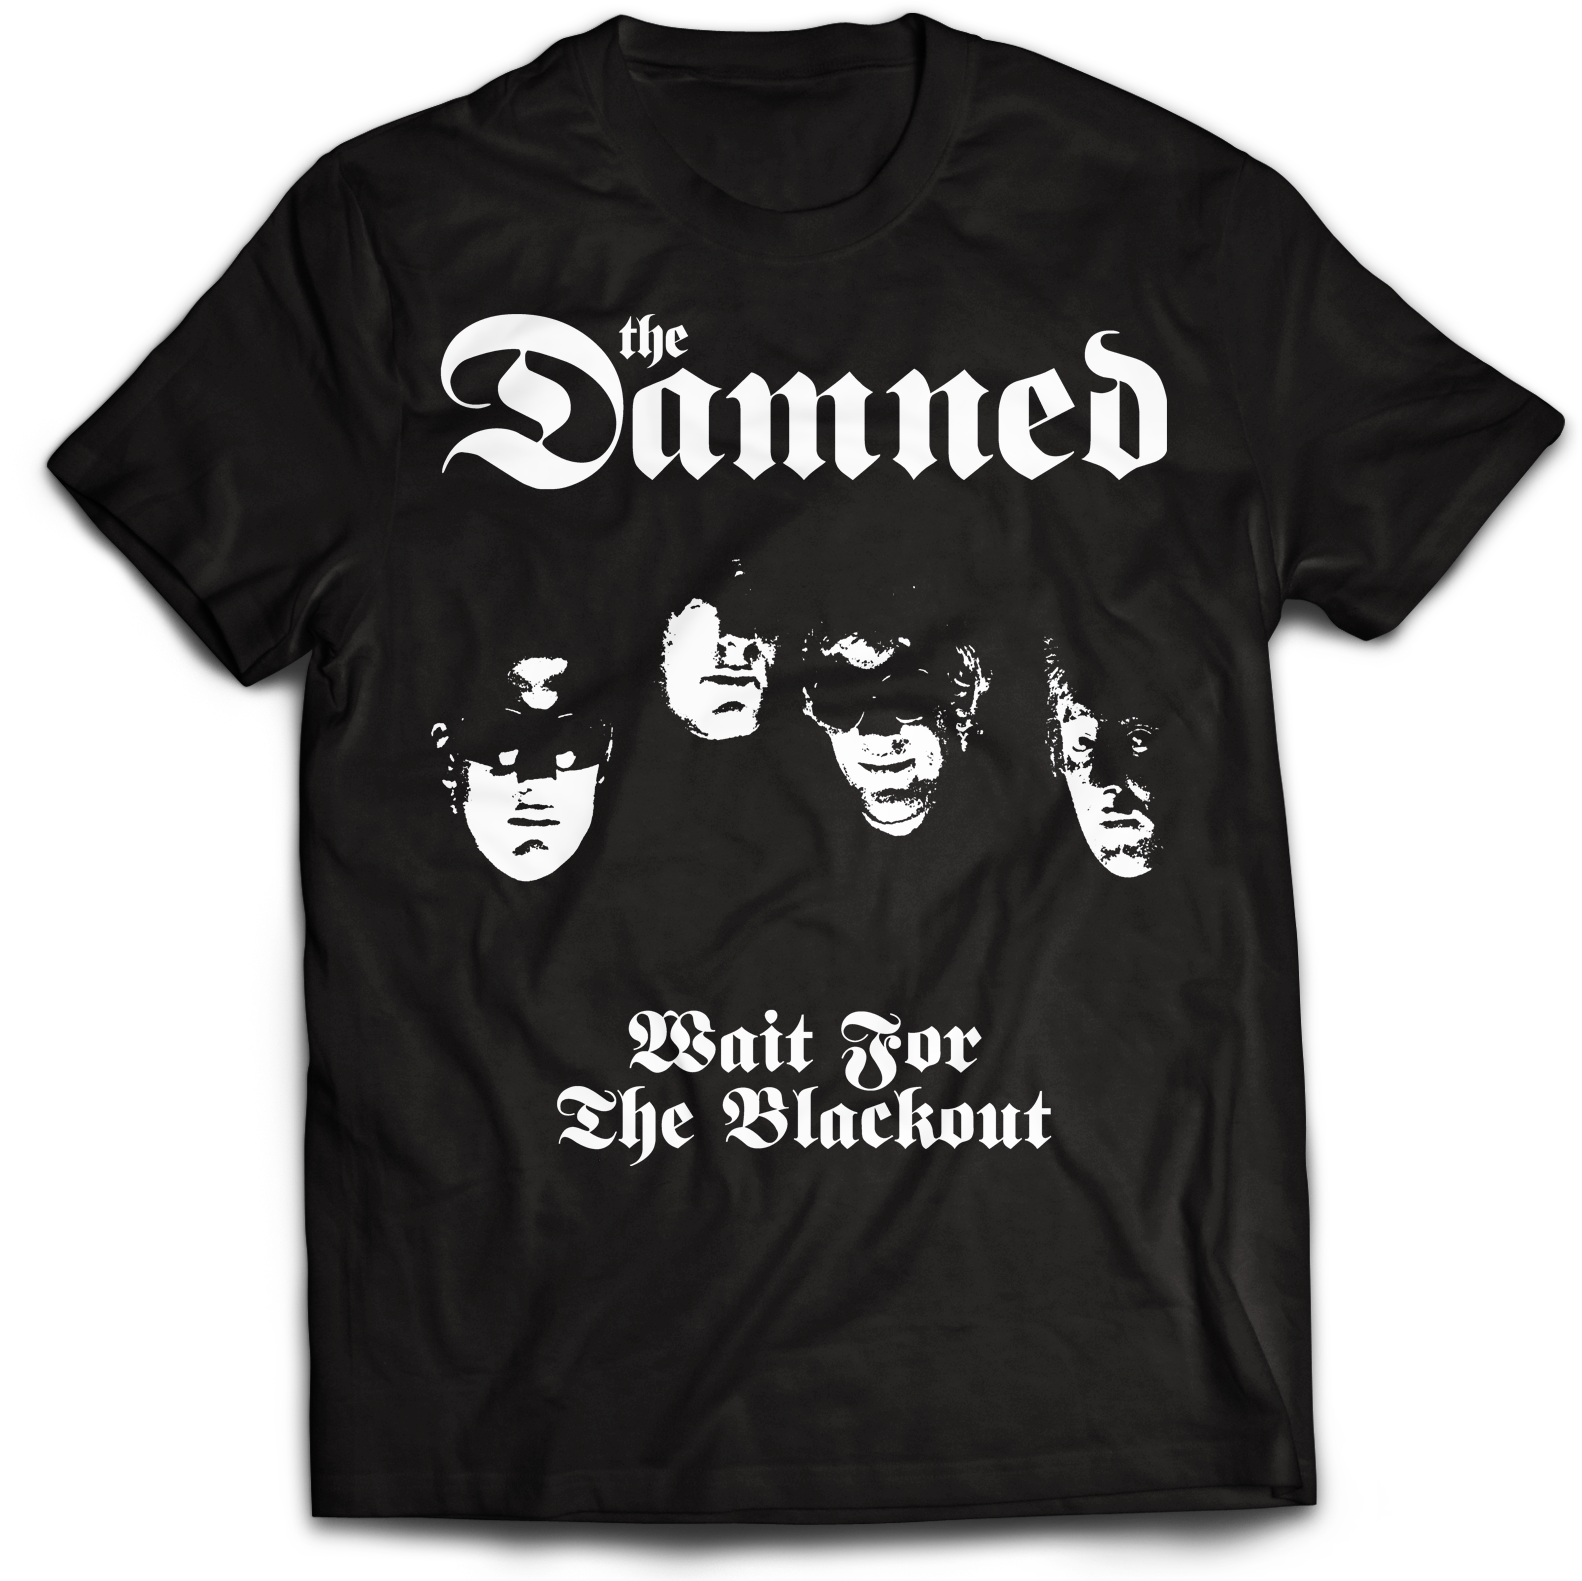 DAMNED "WAIT FOR THE BLACKOUT" T-SHIRT